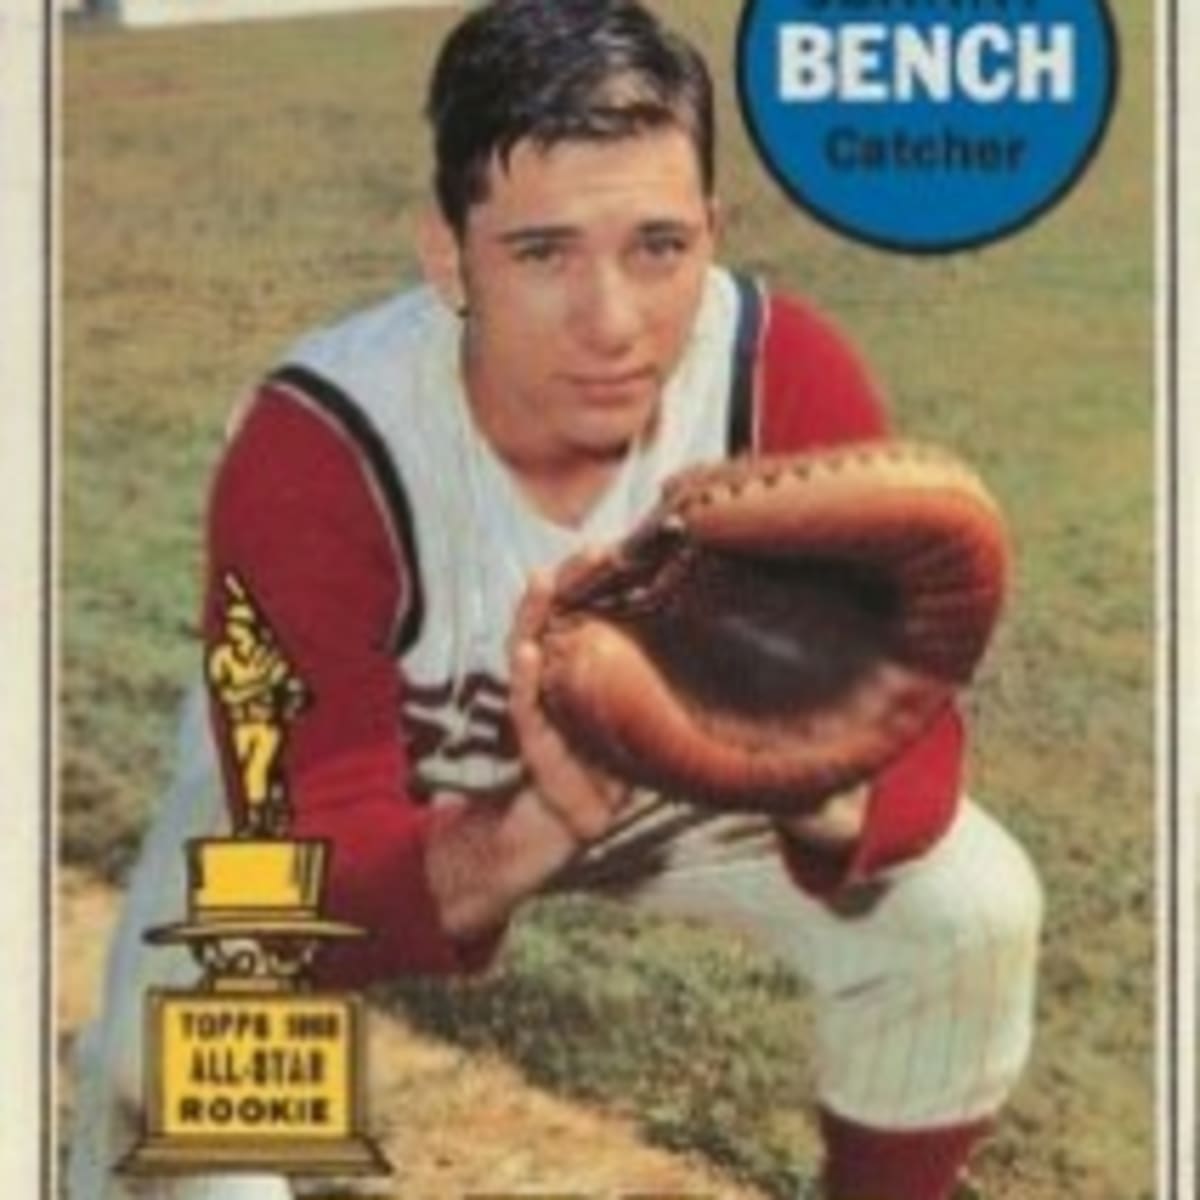 Johnny Bench is seeking a new challenge at age 70 - Sports Illustrated